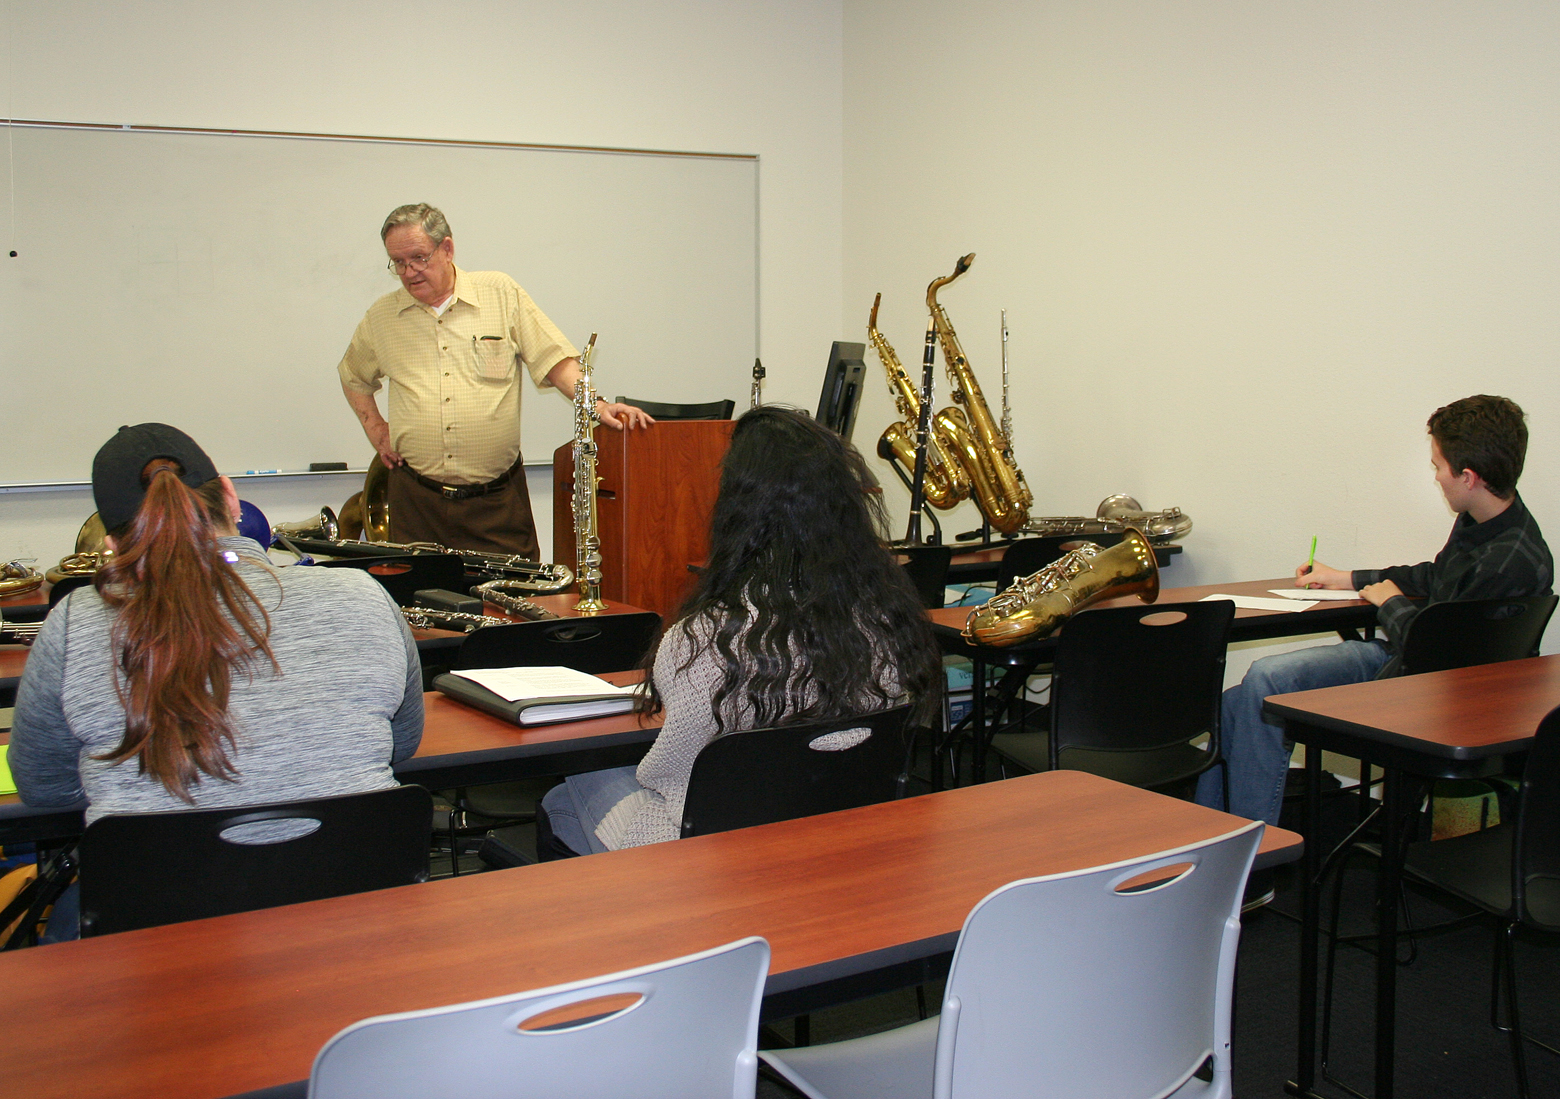 PJC-Sulphur Springs Center Music Instructor Introduces Class to Variety of Instruments